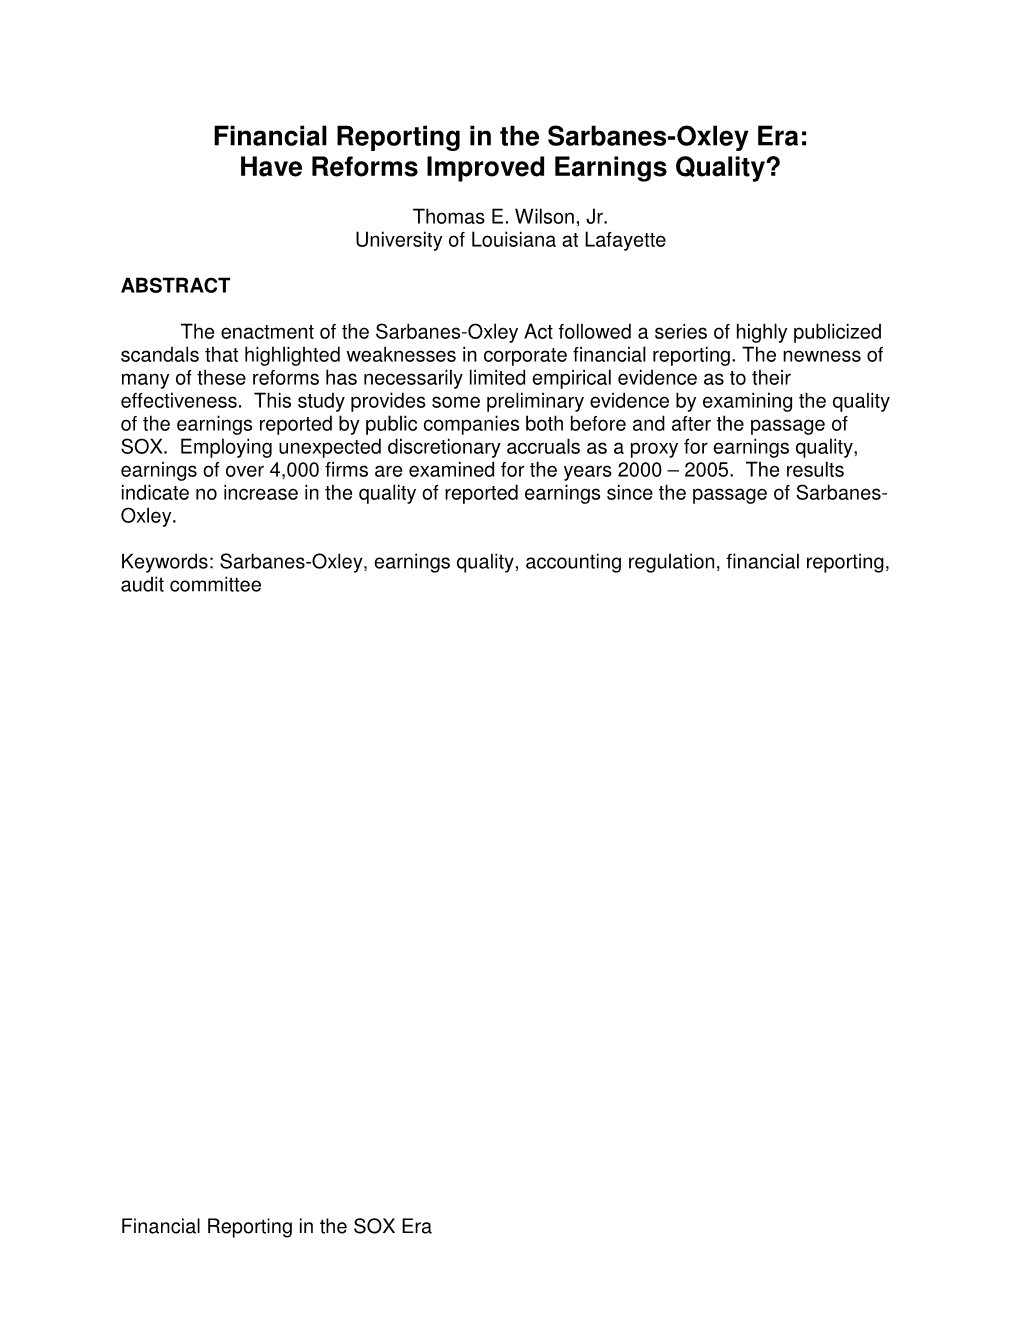 Financial Reporting in the Sarbanes-Oxley Era: Have Reforms Improved Earnings Quality?